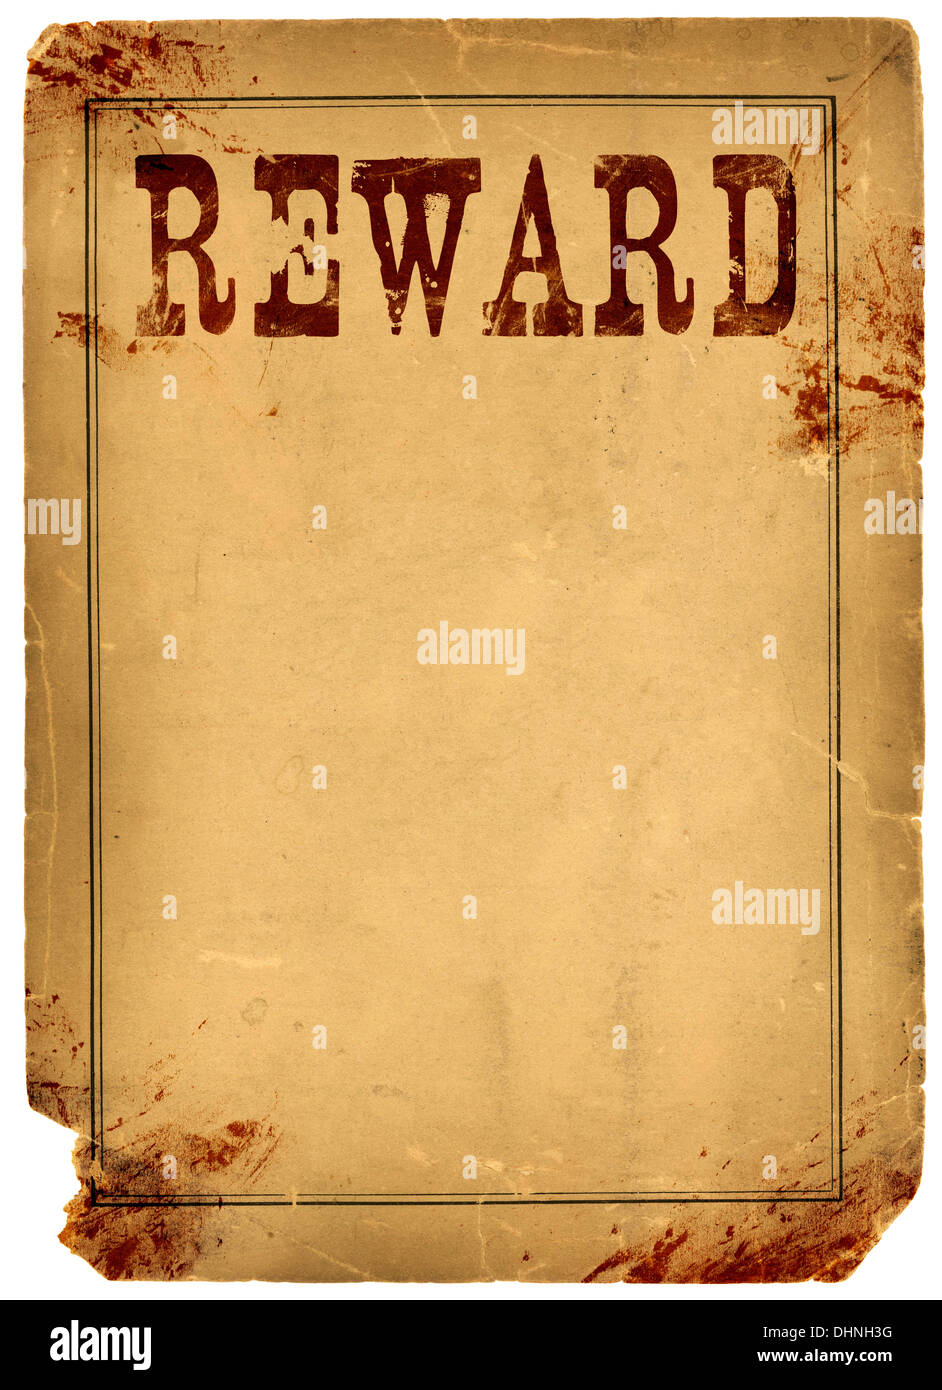 Bloody stained old western reward poster made from real antique 1800s paper Stock Photo